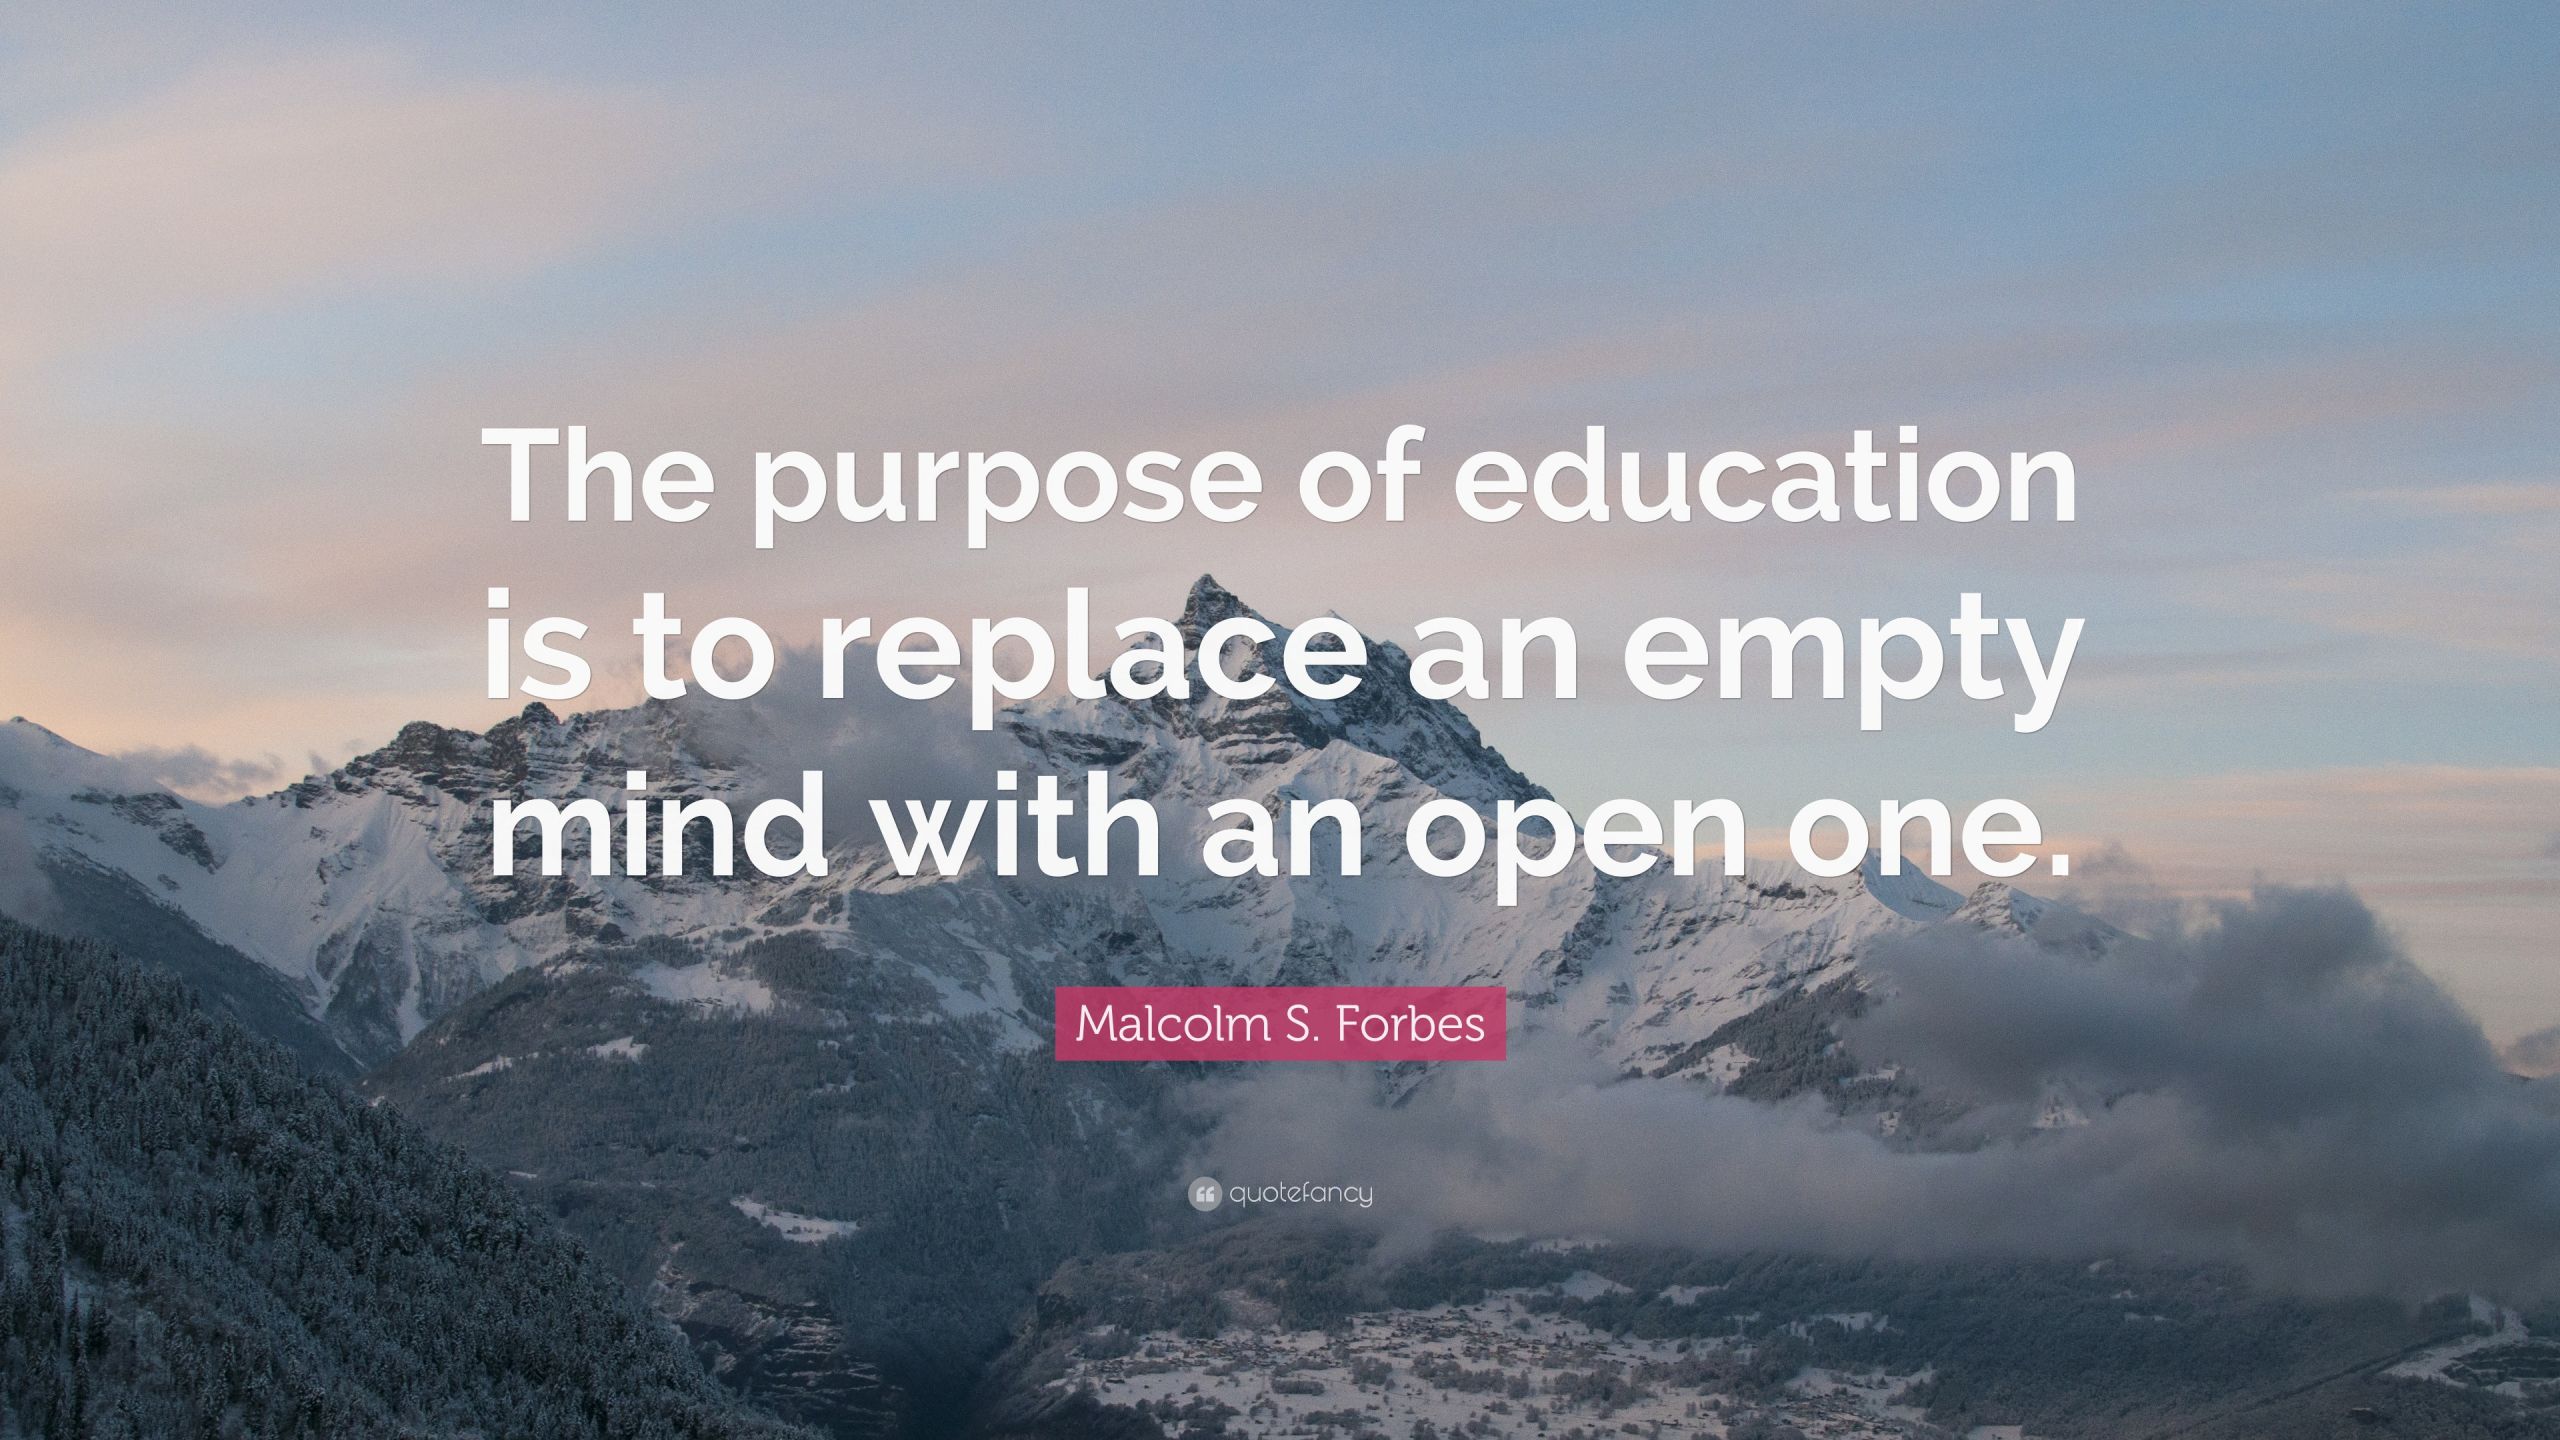 Inspirational Quotes On Education
 Education Quotes Askideas